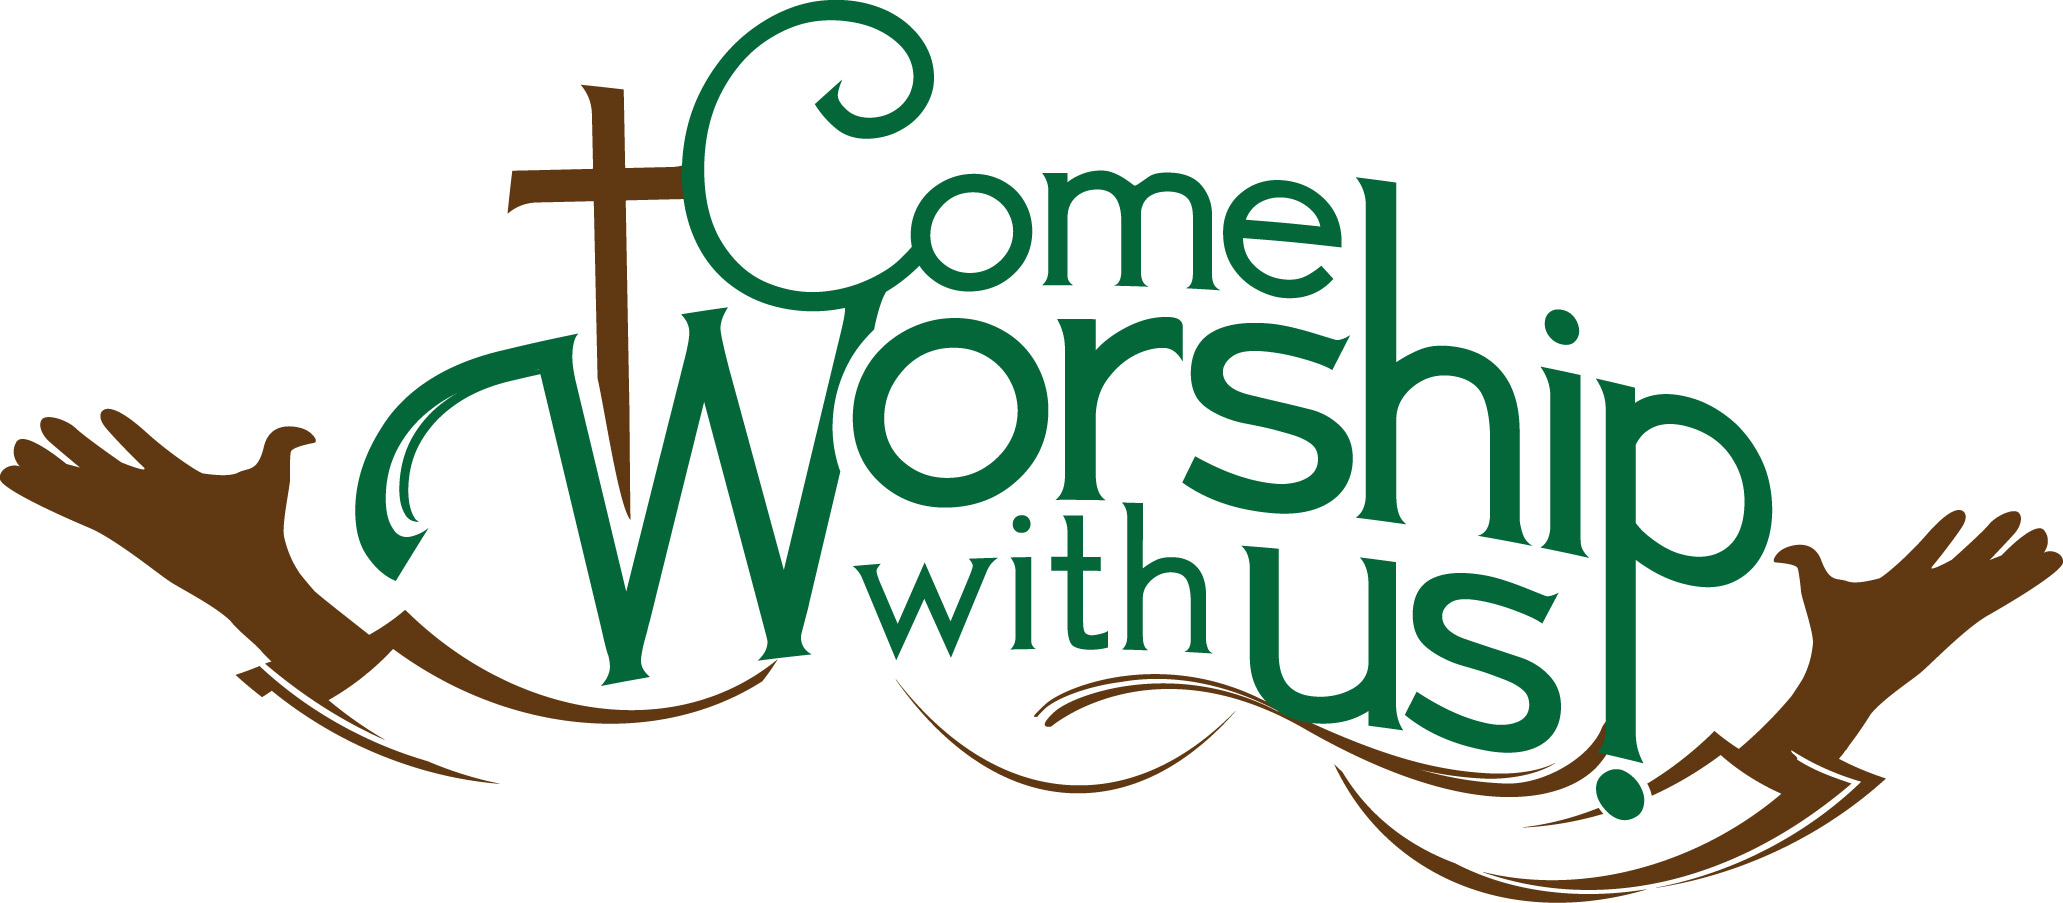 come-worship-with-us